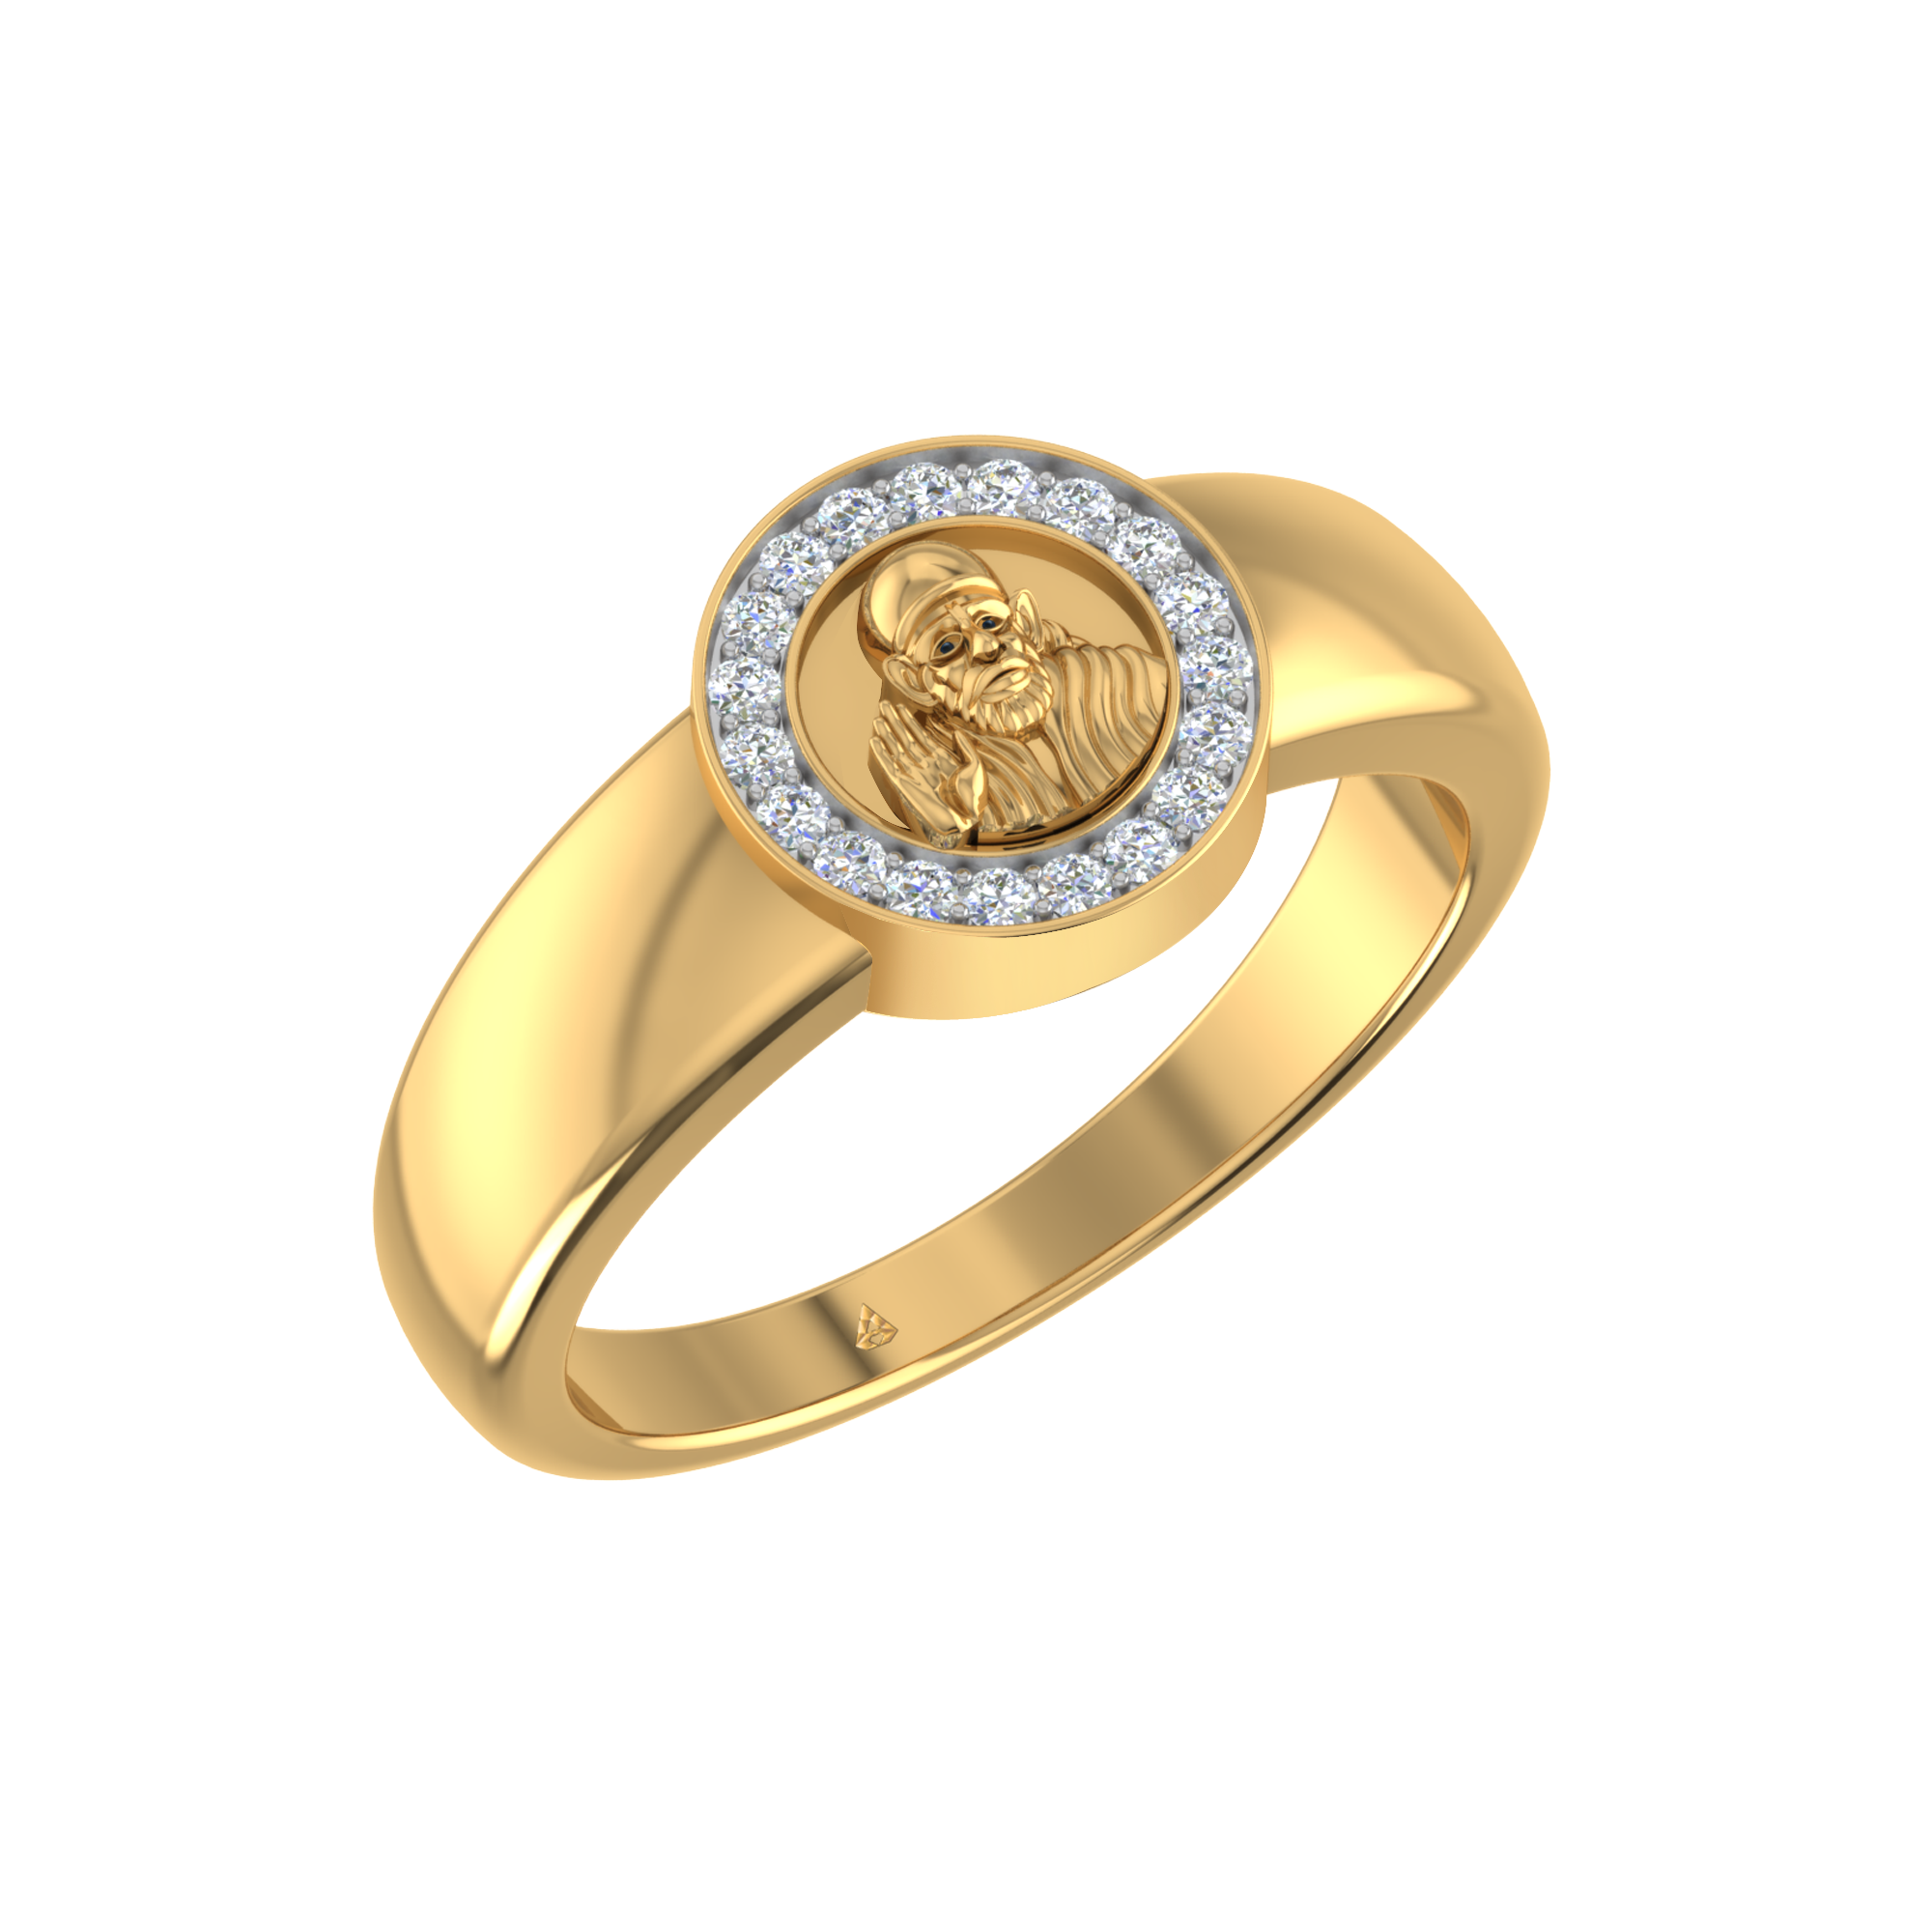 Saint Joseph Oval Ring In Solid Gold (Yellow/Rose/White)